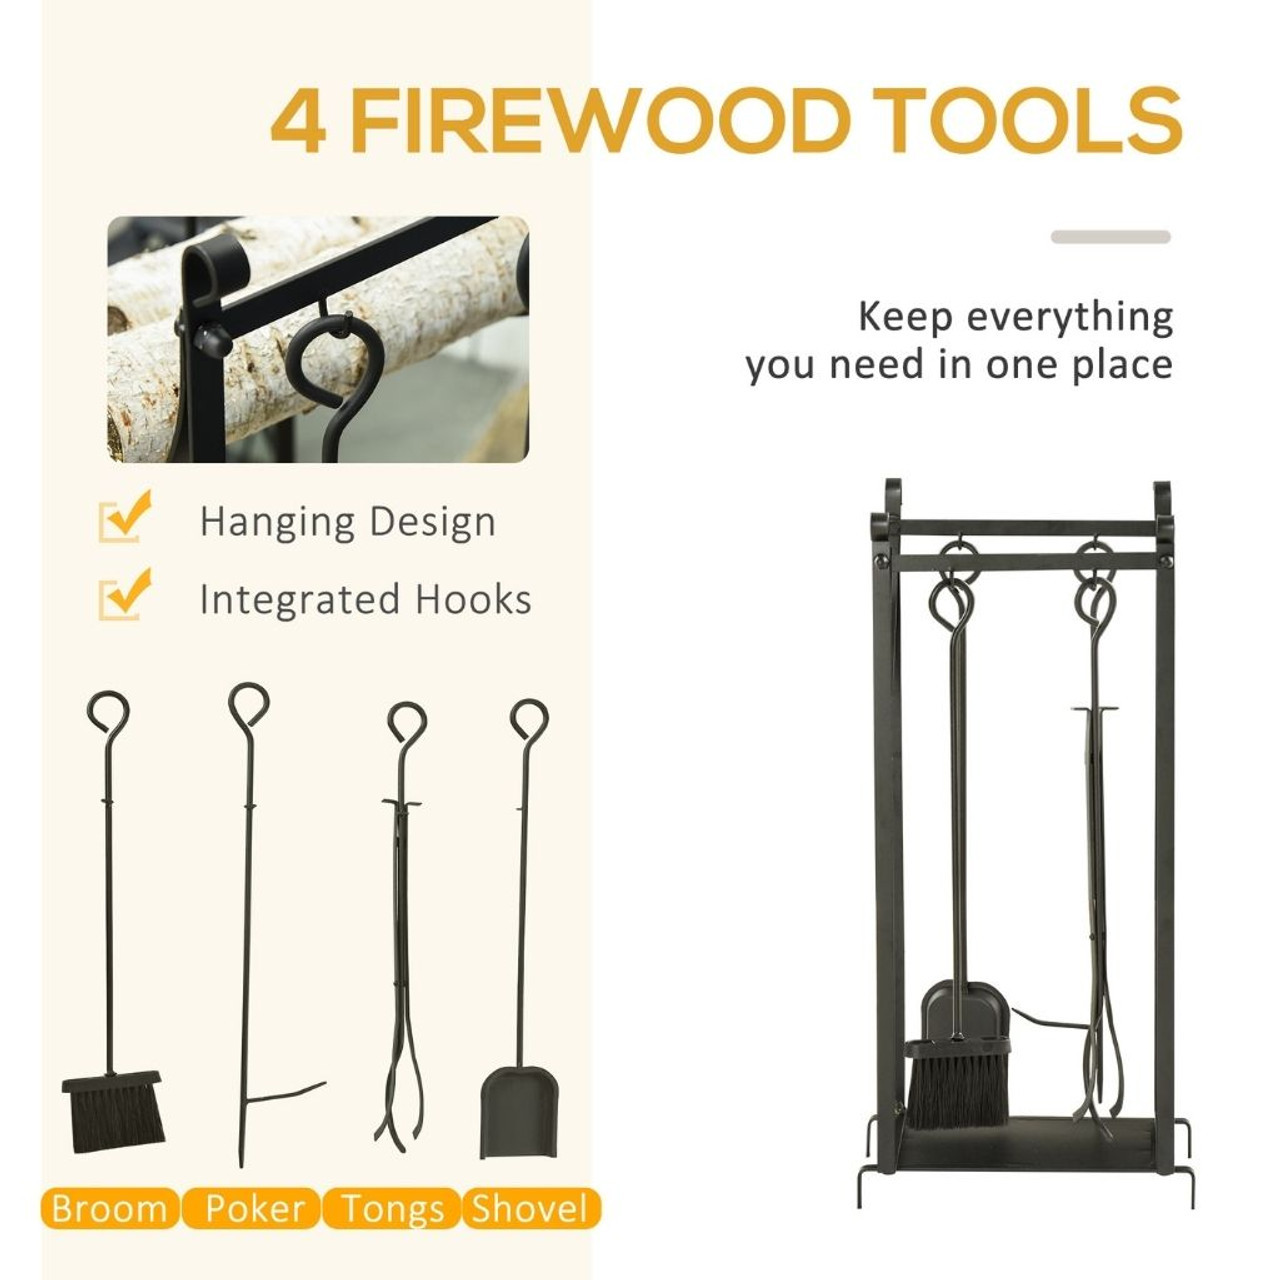 2-Tier Firewood Holder with Shovel, Brush, Poker, and Tongs product image